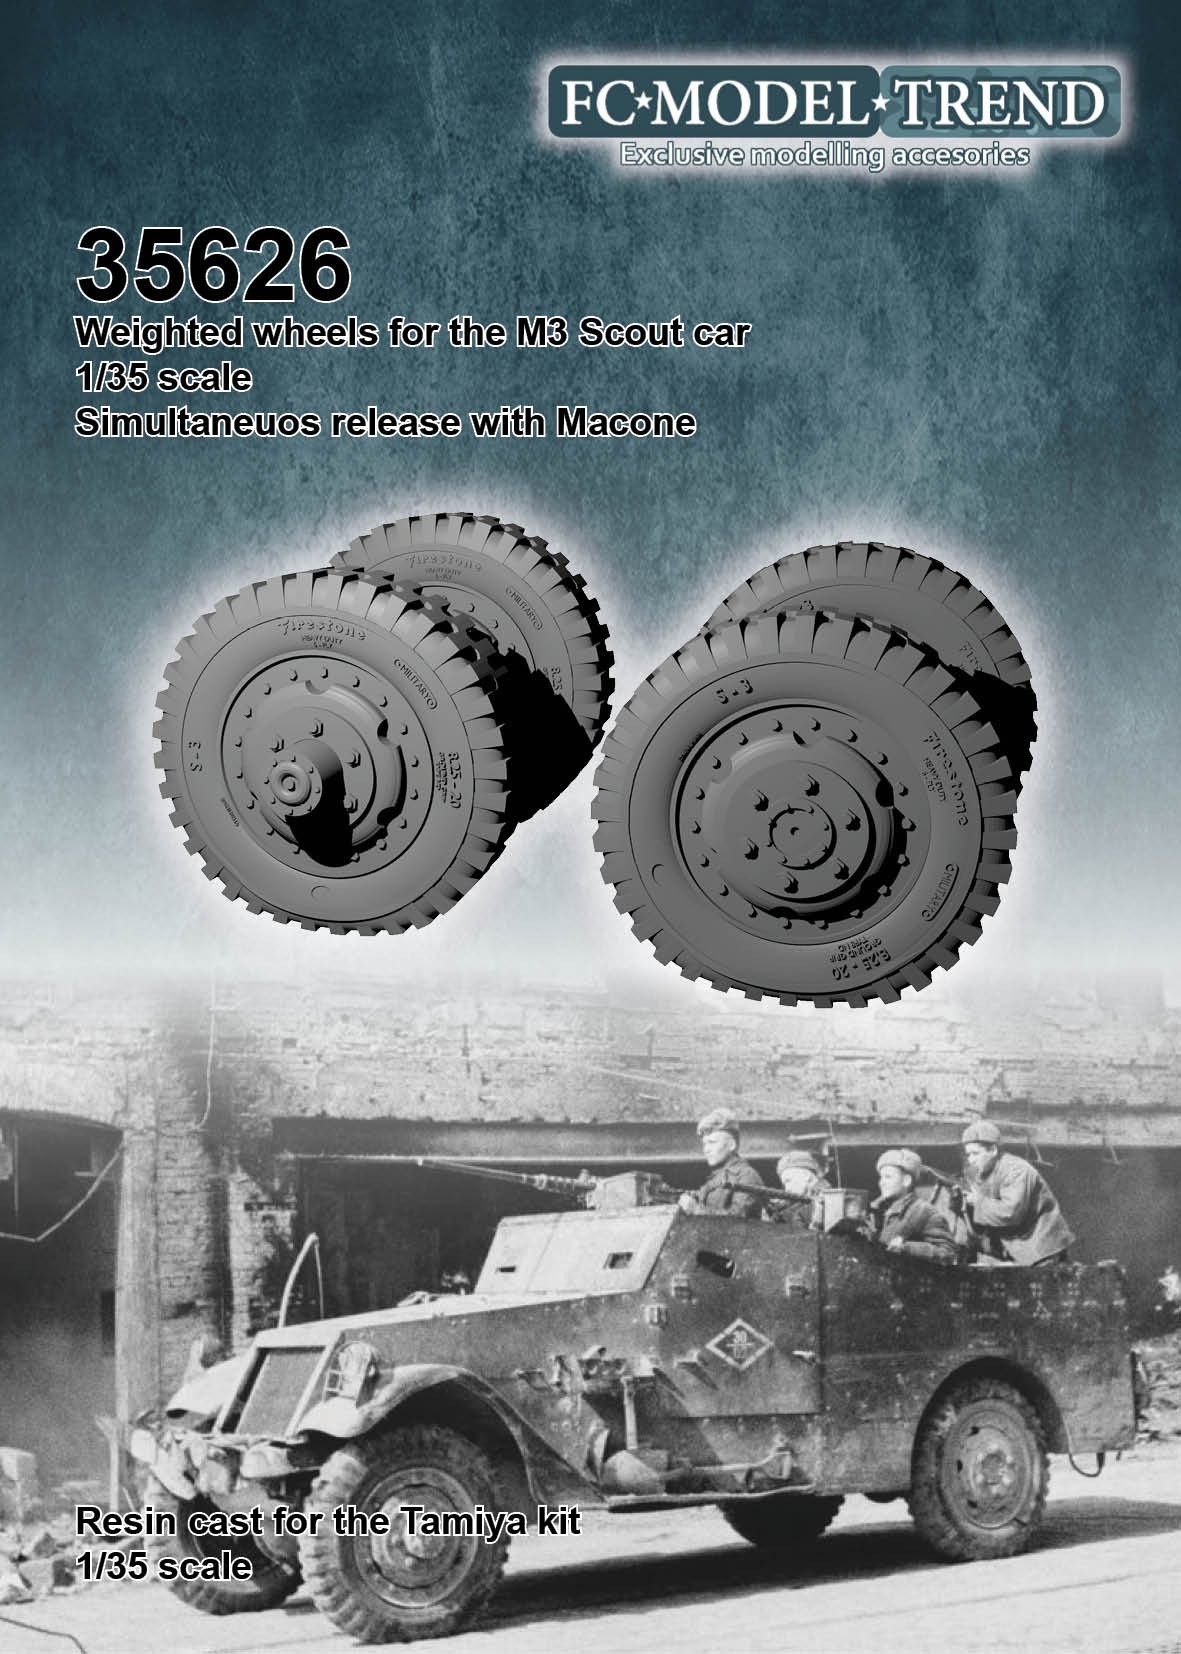 M3 scout car weighted wheels, resin cast 1/35 scale for the Tamiya kit